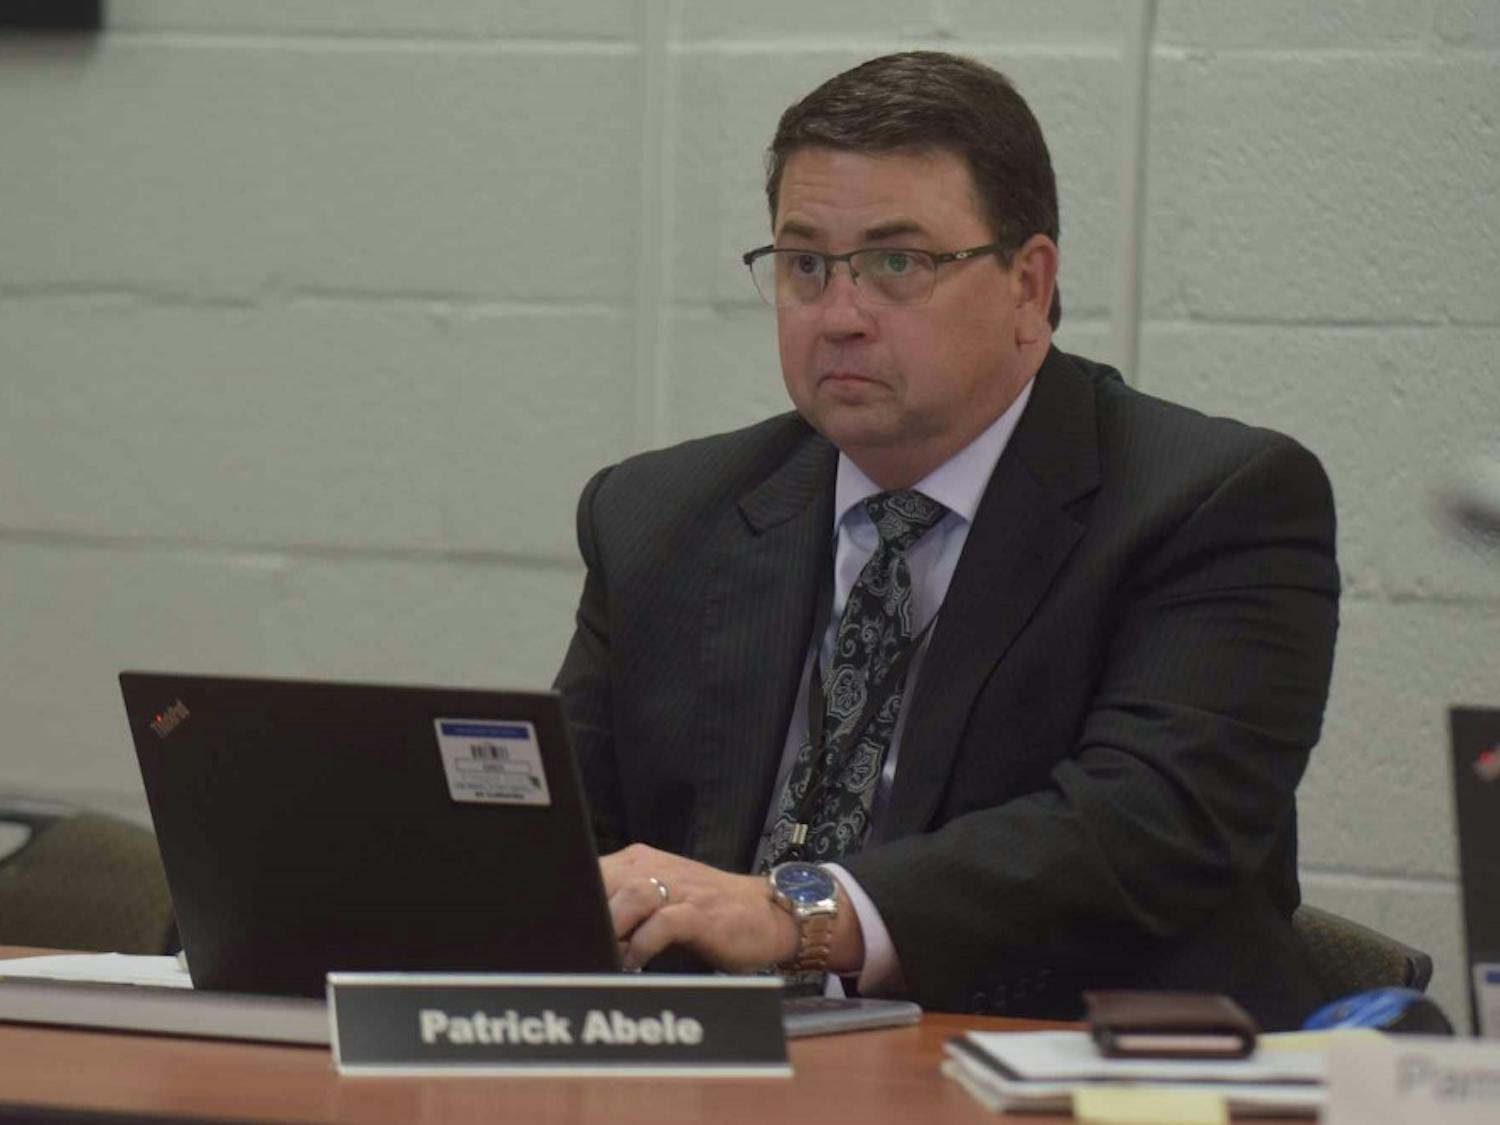 Patrick Abele, assistant superintendent of the Chapel Hill - Carrboro city schools, sits in on a district meeting on Friday, Feb. 7, 2019 at the Lincoln Center on 750 S. Merritt Mill Rd.